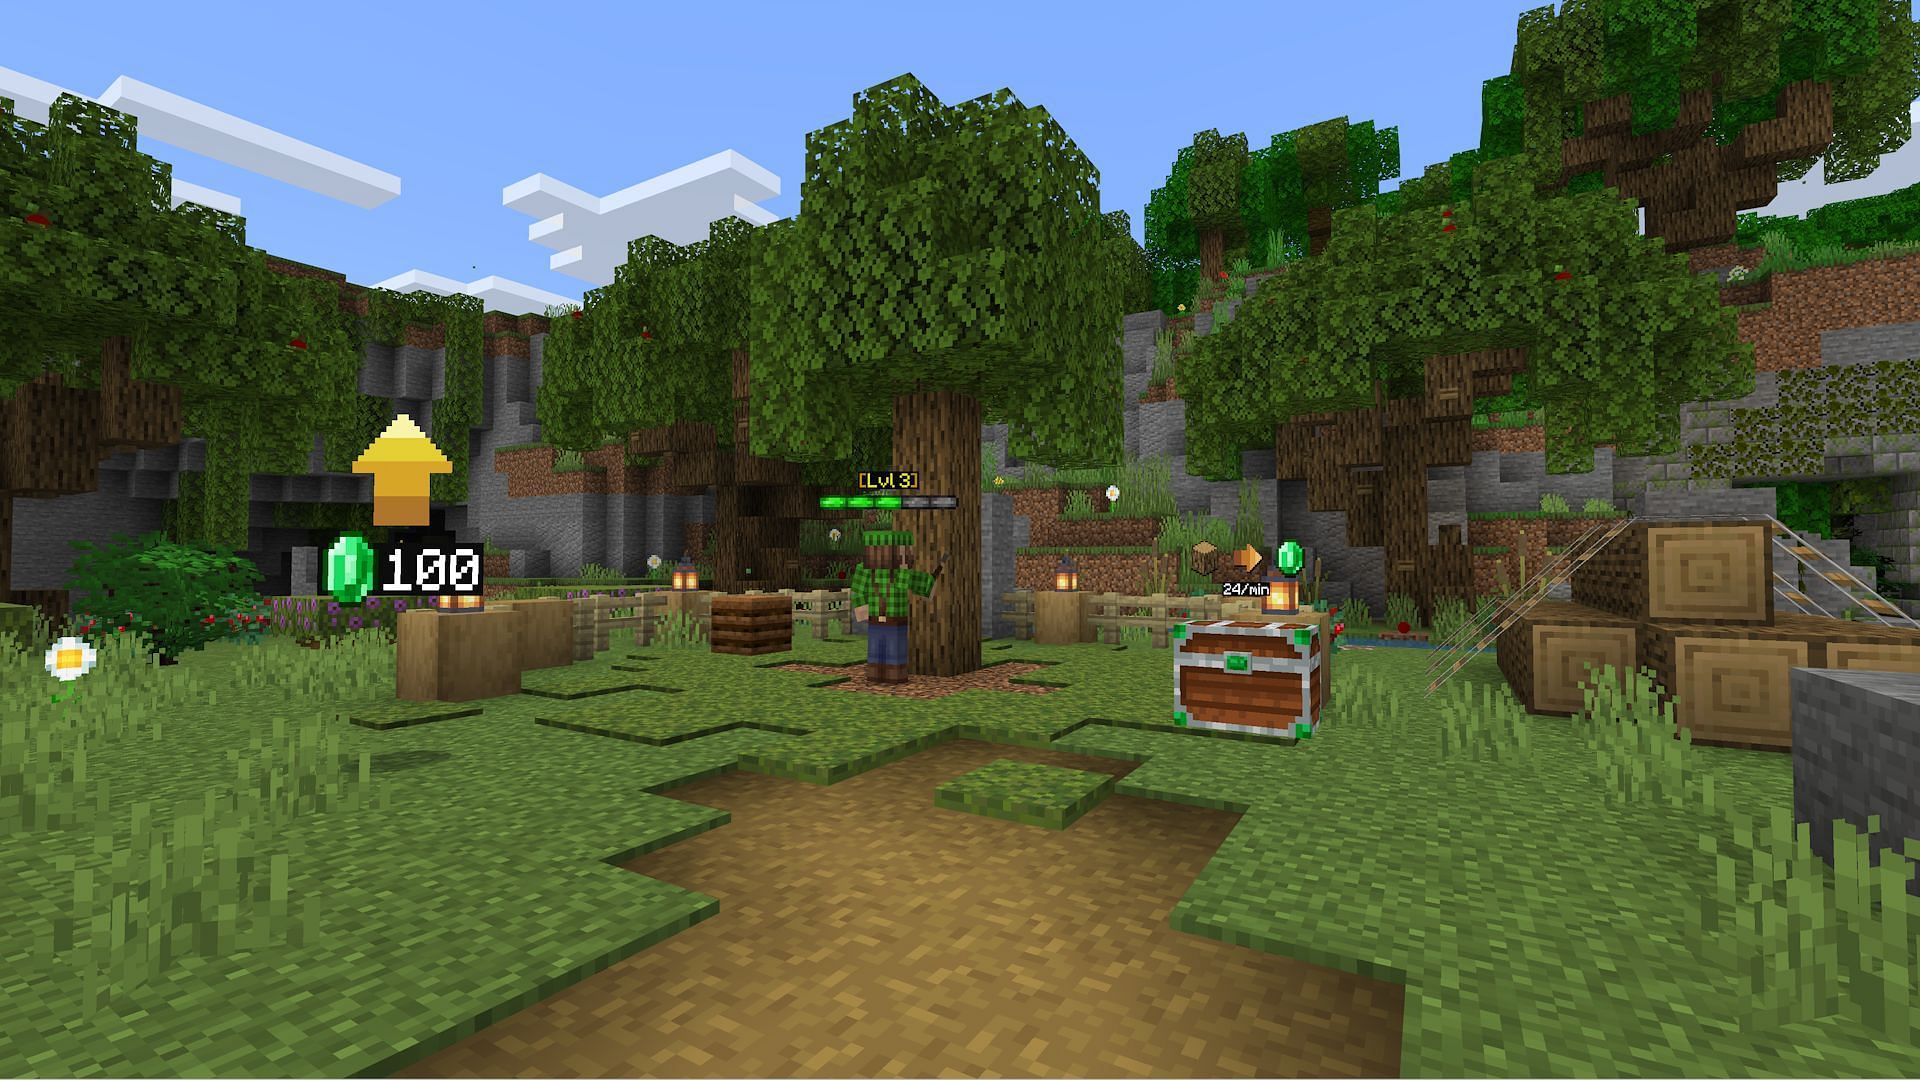 One of the emerald generating areas in Emerald Tycoon (Image via Mojang)